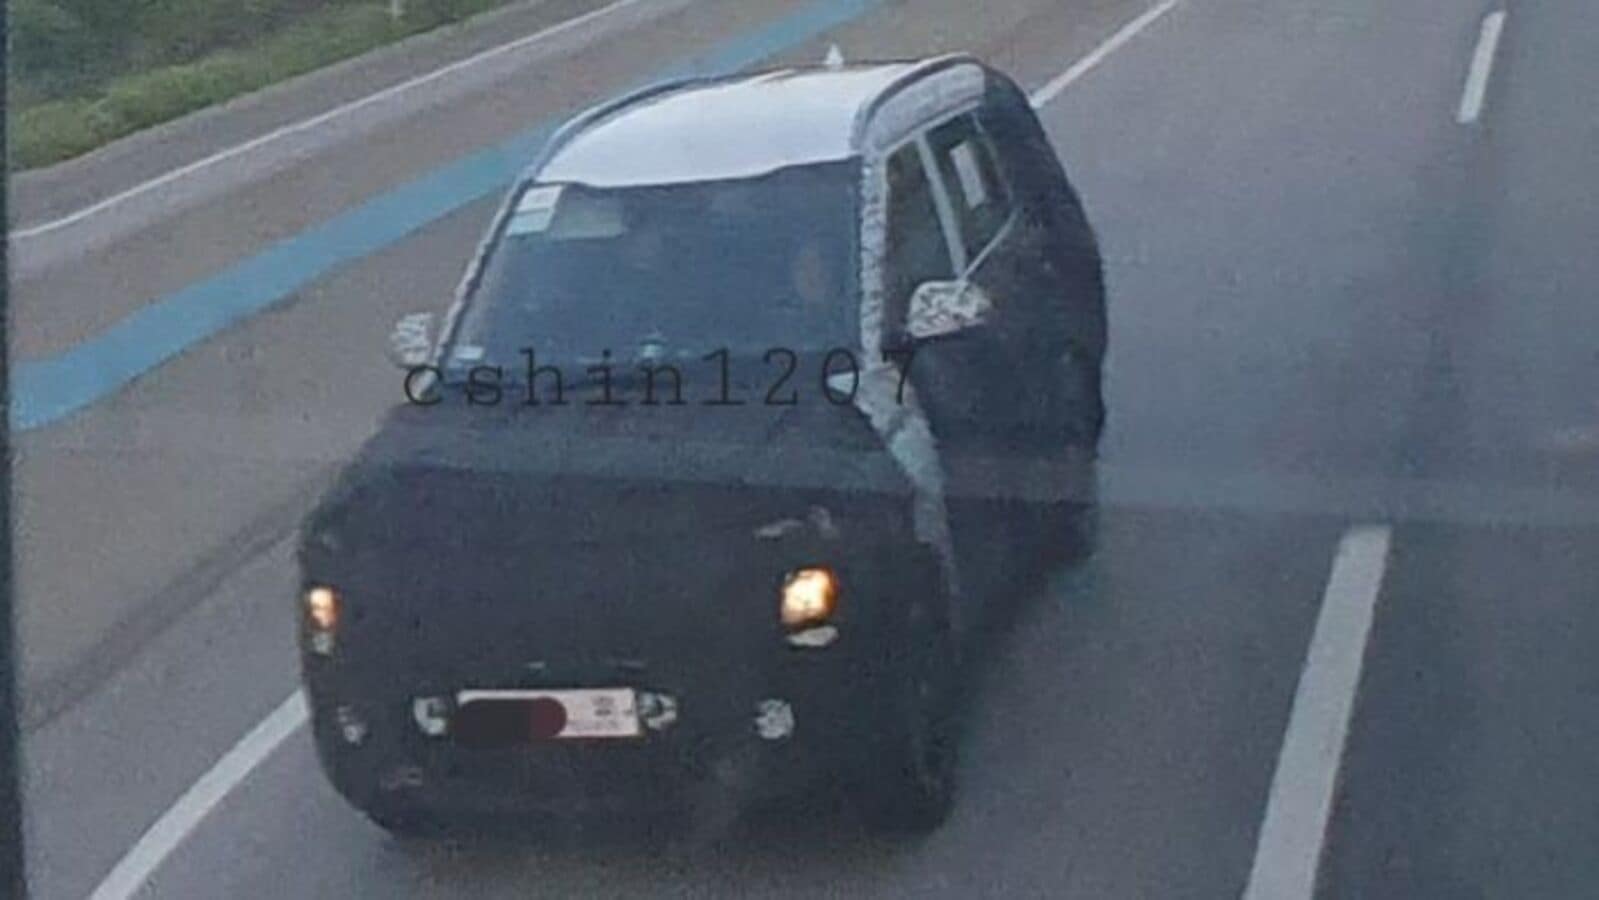 Kia Carens facelift spied being tested, reveals new upgrades. Check details